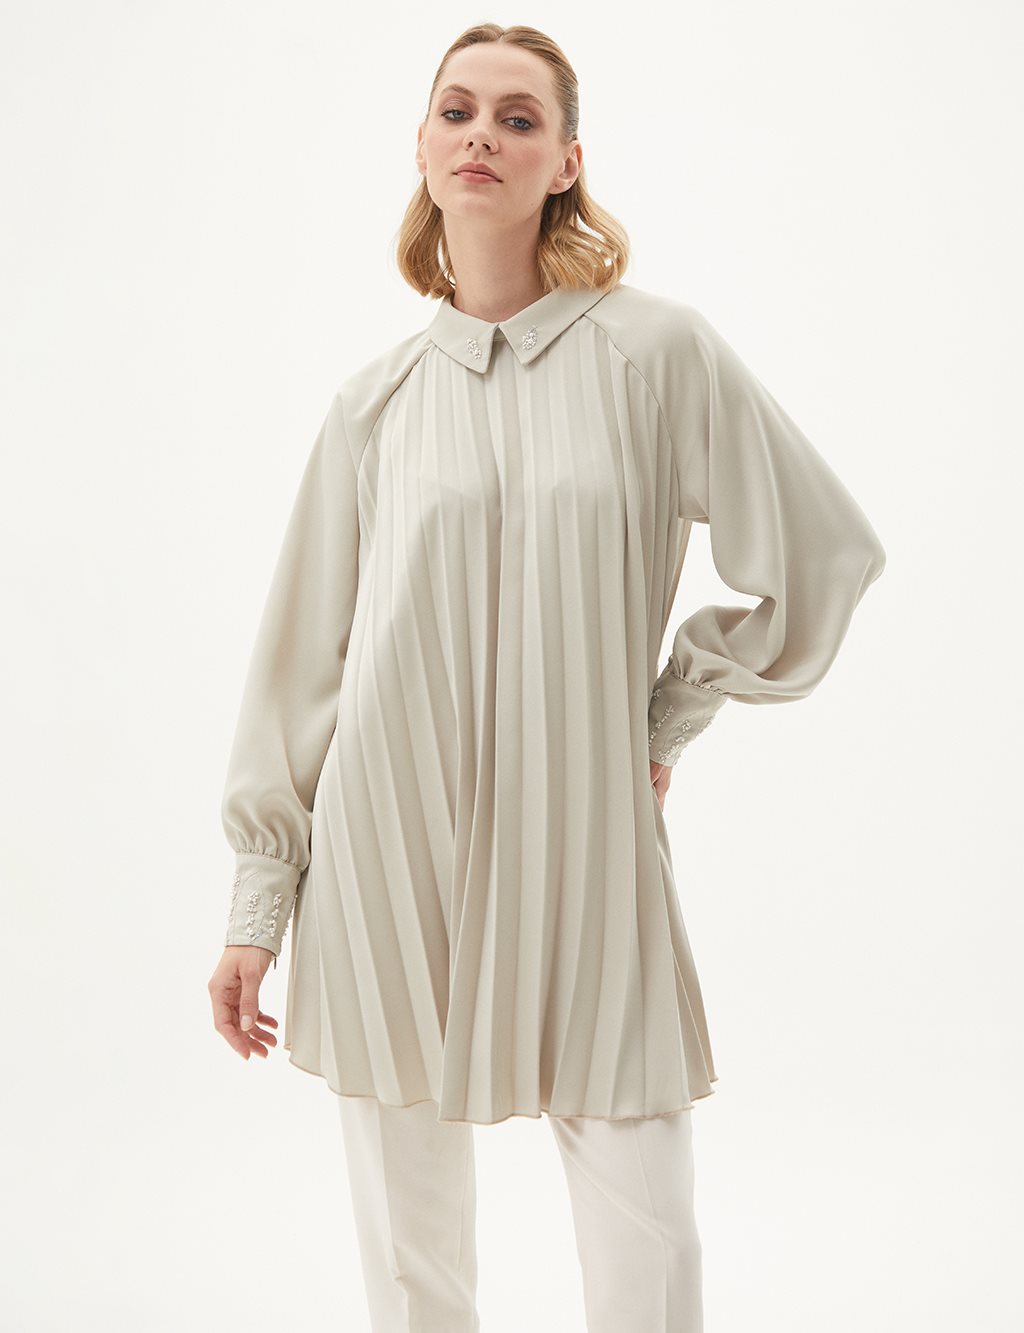 Satin Tunic Cream with Embroidered Sleeves